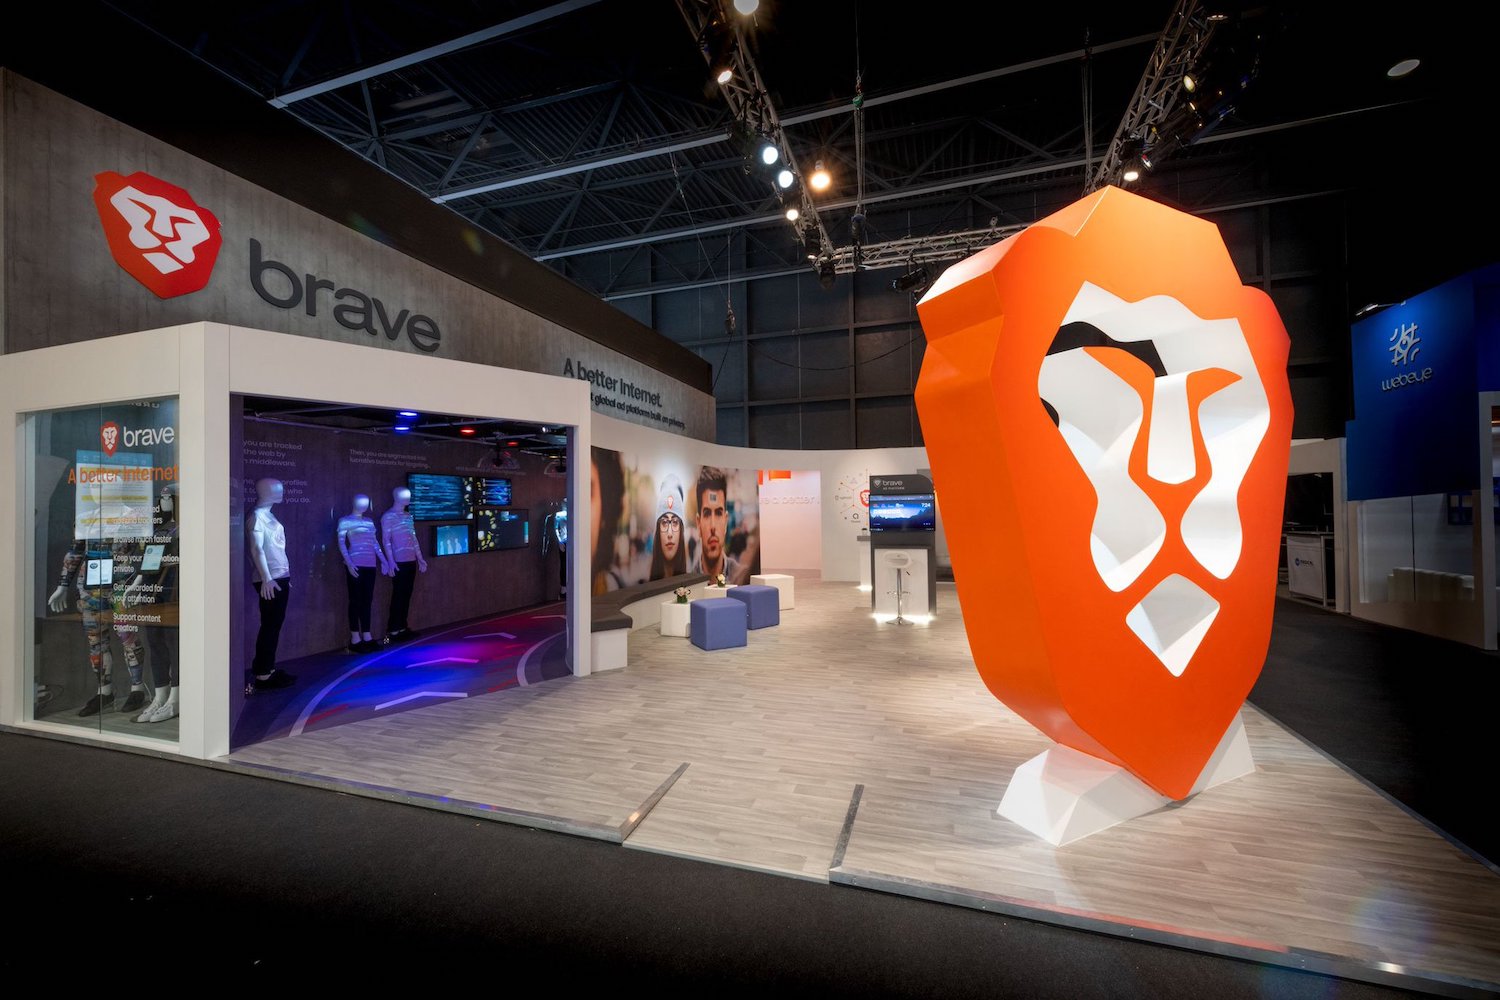 Brave Browser To Raise Over $30 Million In Series A Equity Round: Sources